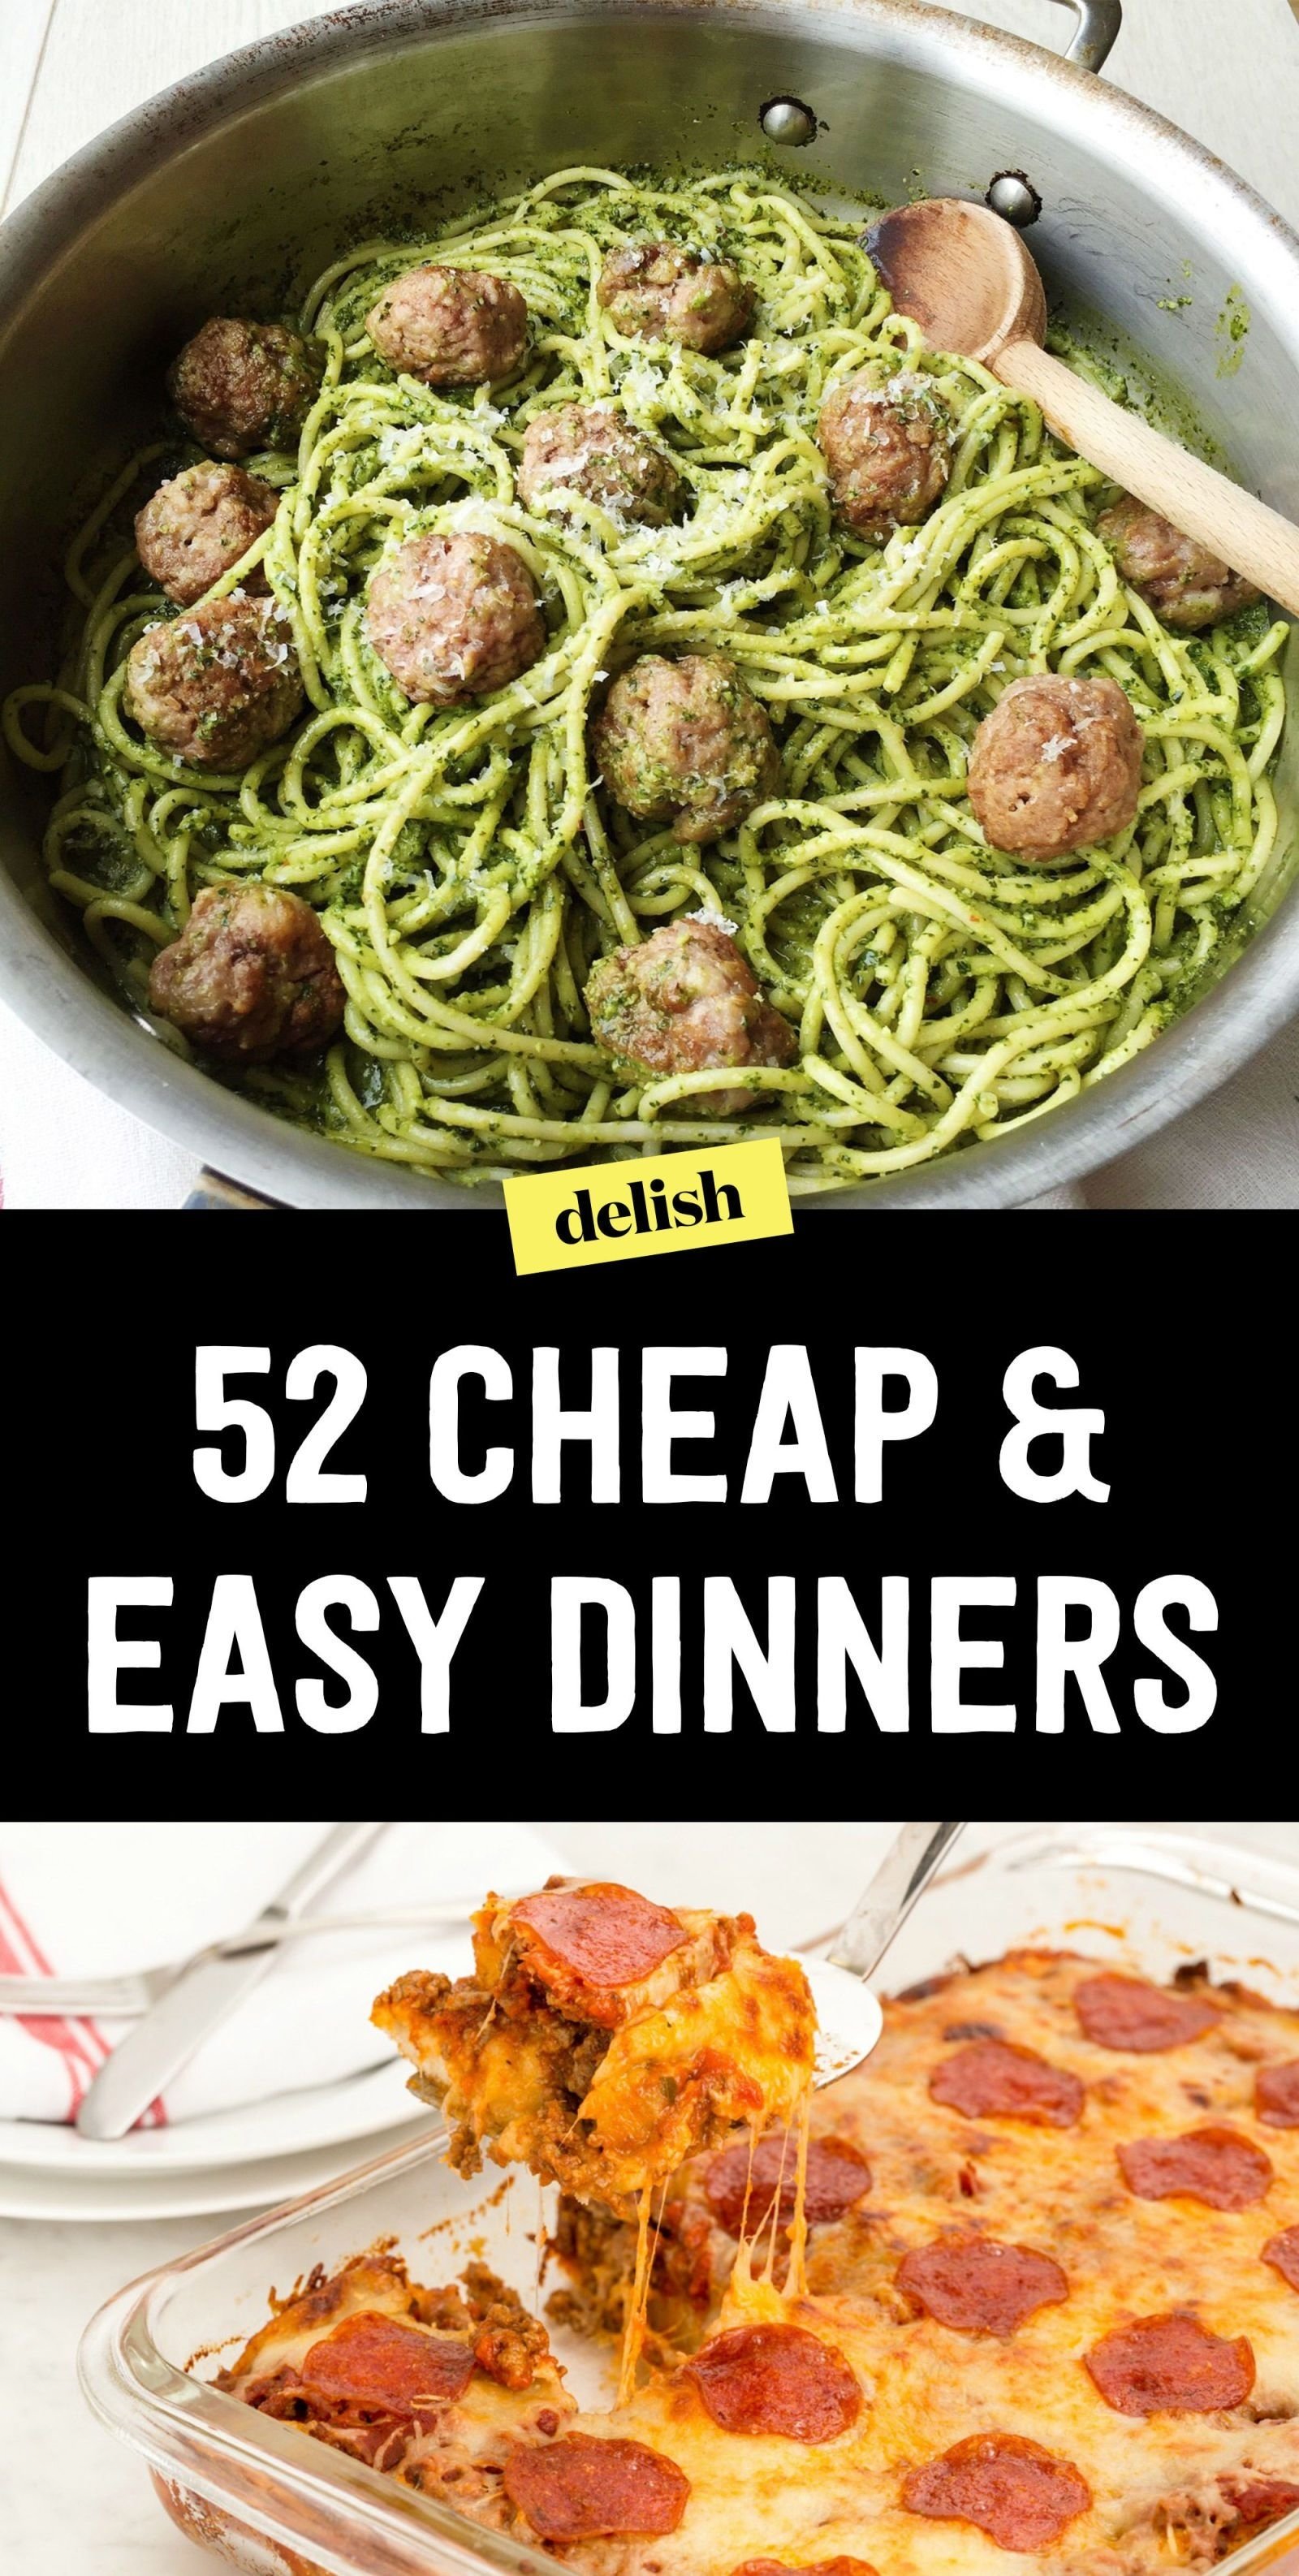 10 Great Cheap Meal Ideas For 2 2020